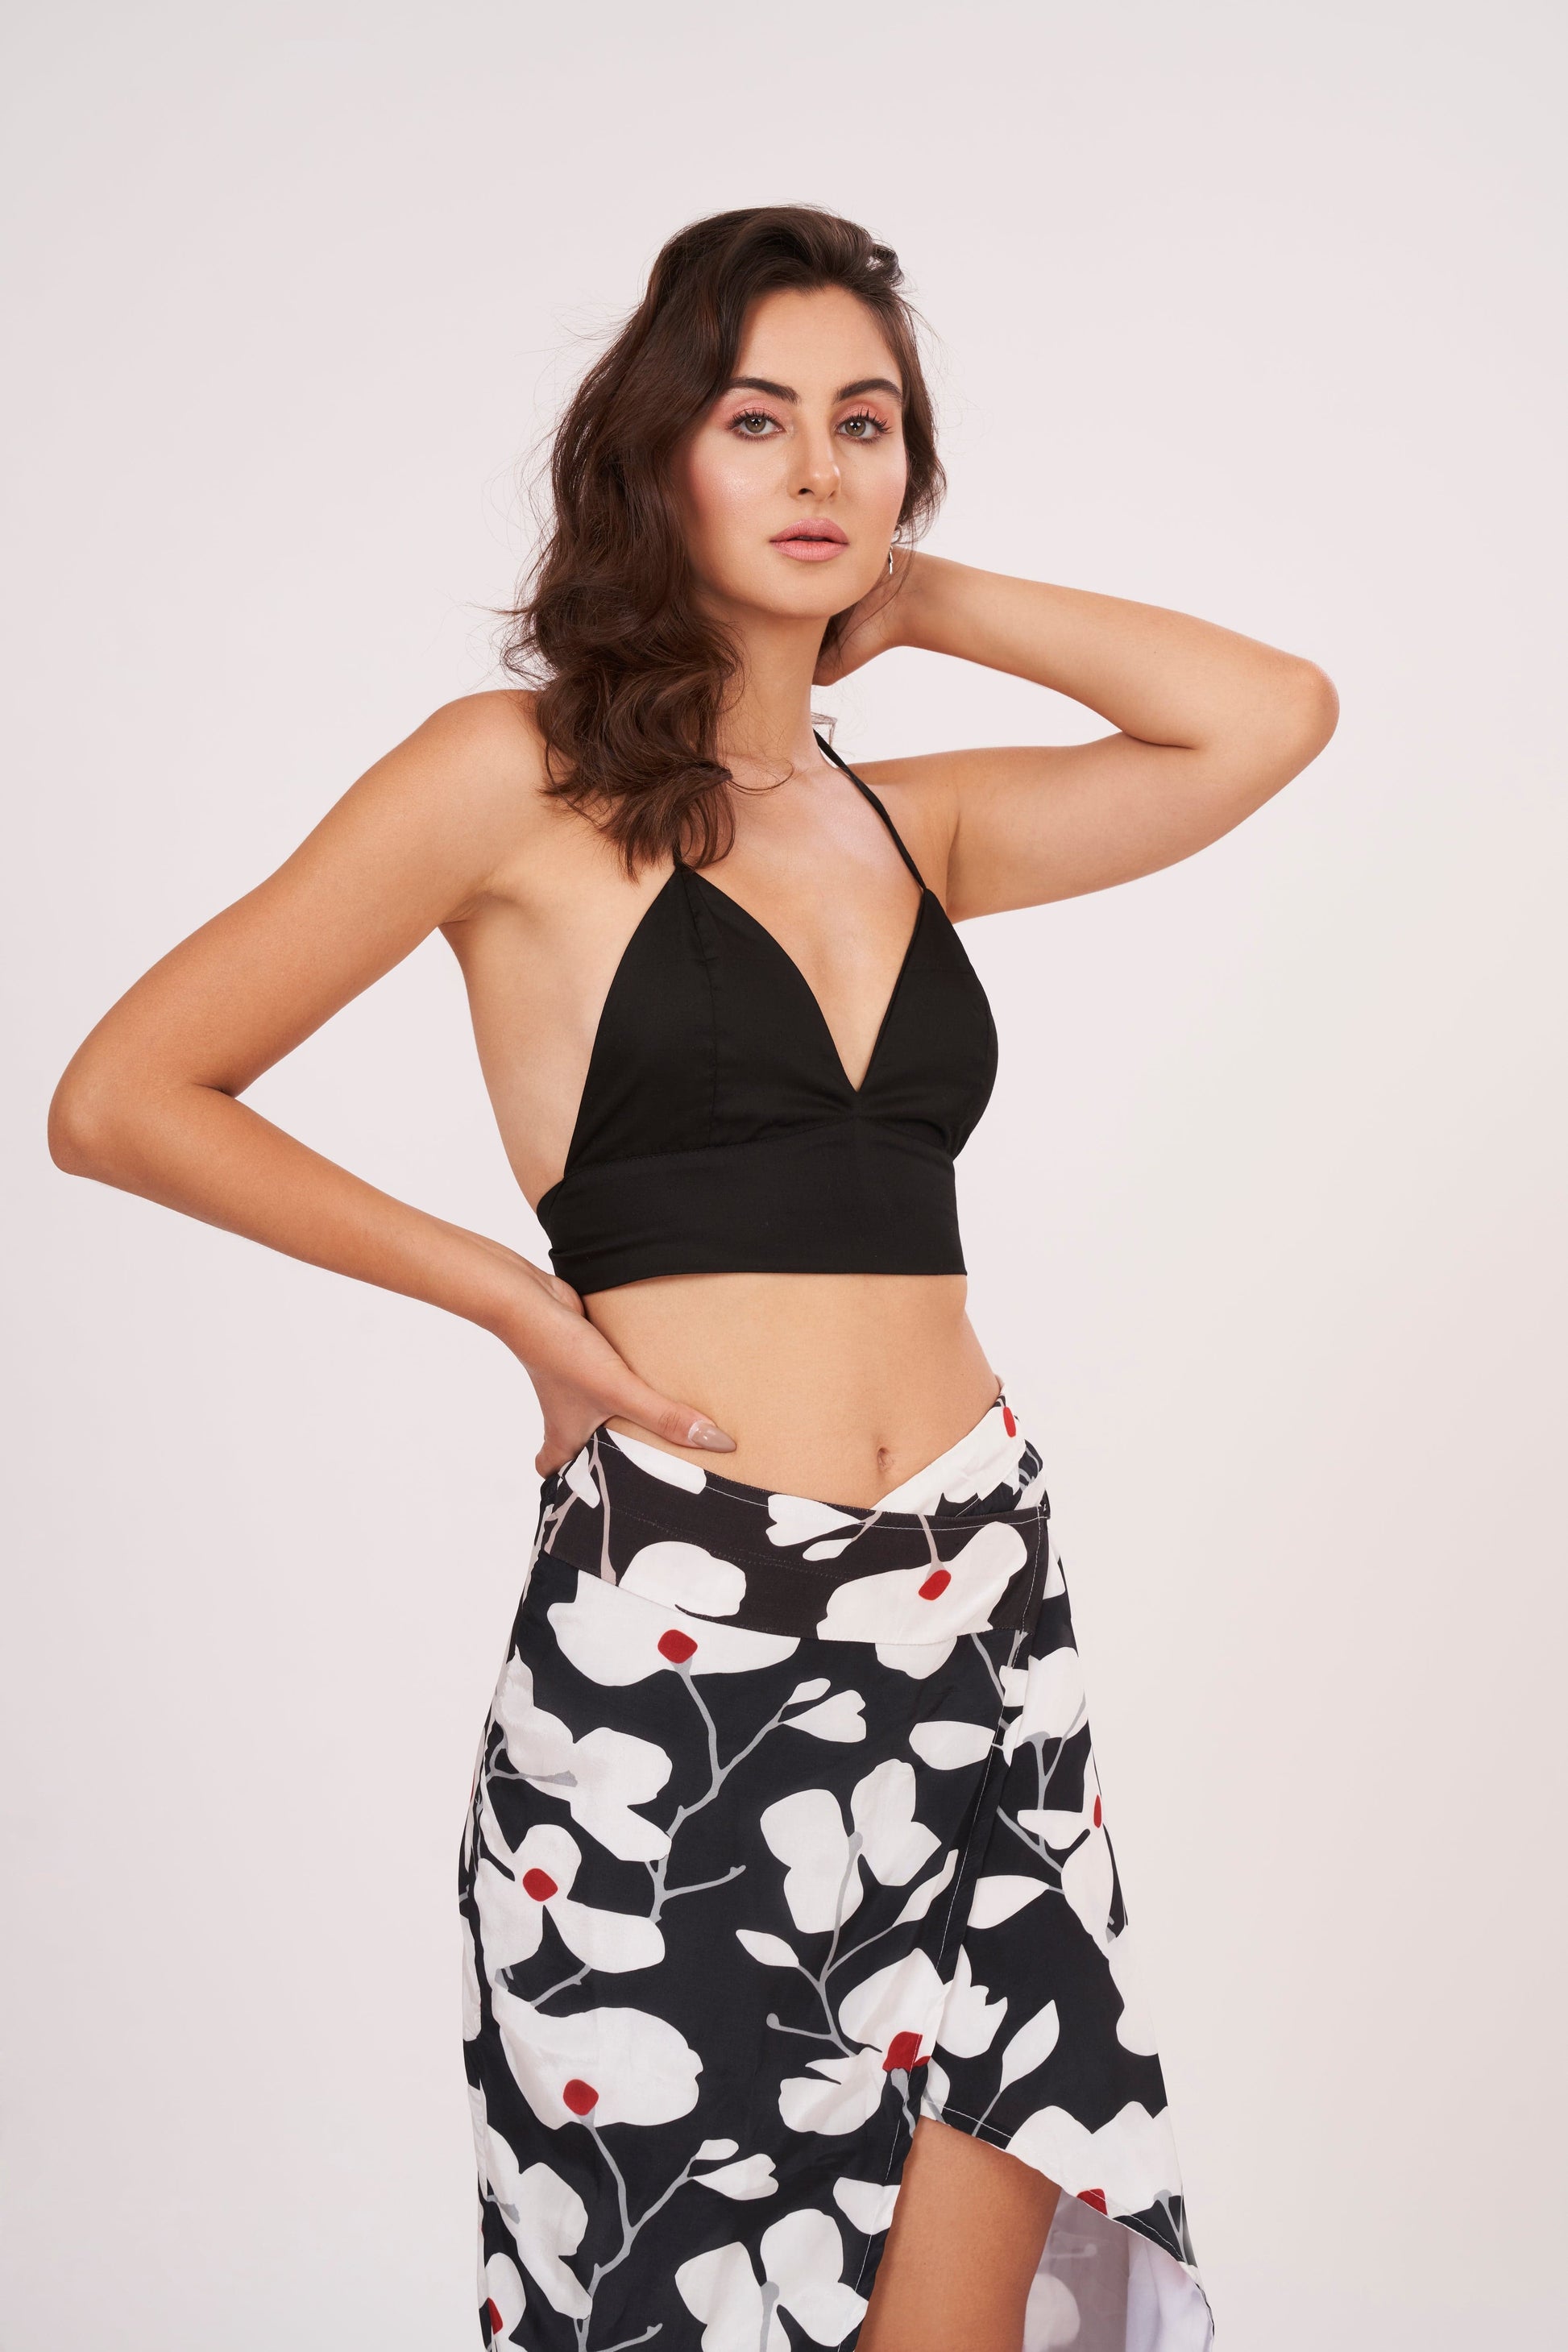 Chic black halter neck bralette with captivating front opening, showcasing shoulders and curves for stylish beach vacations and glamorous occasions.